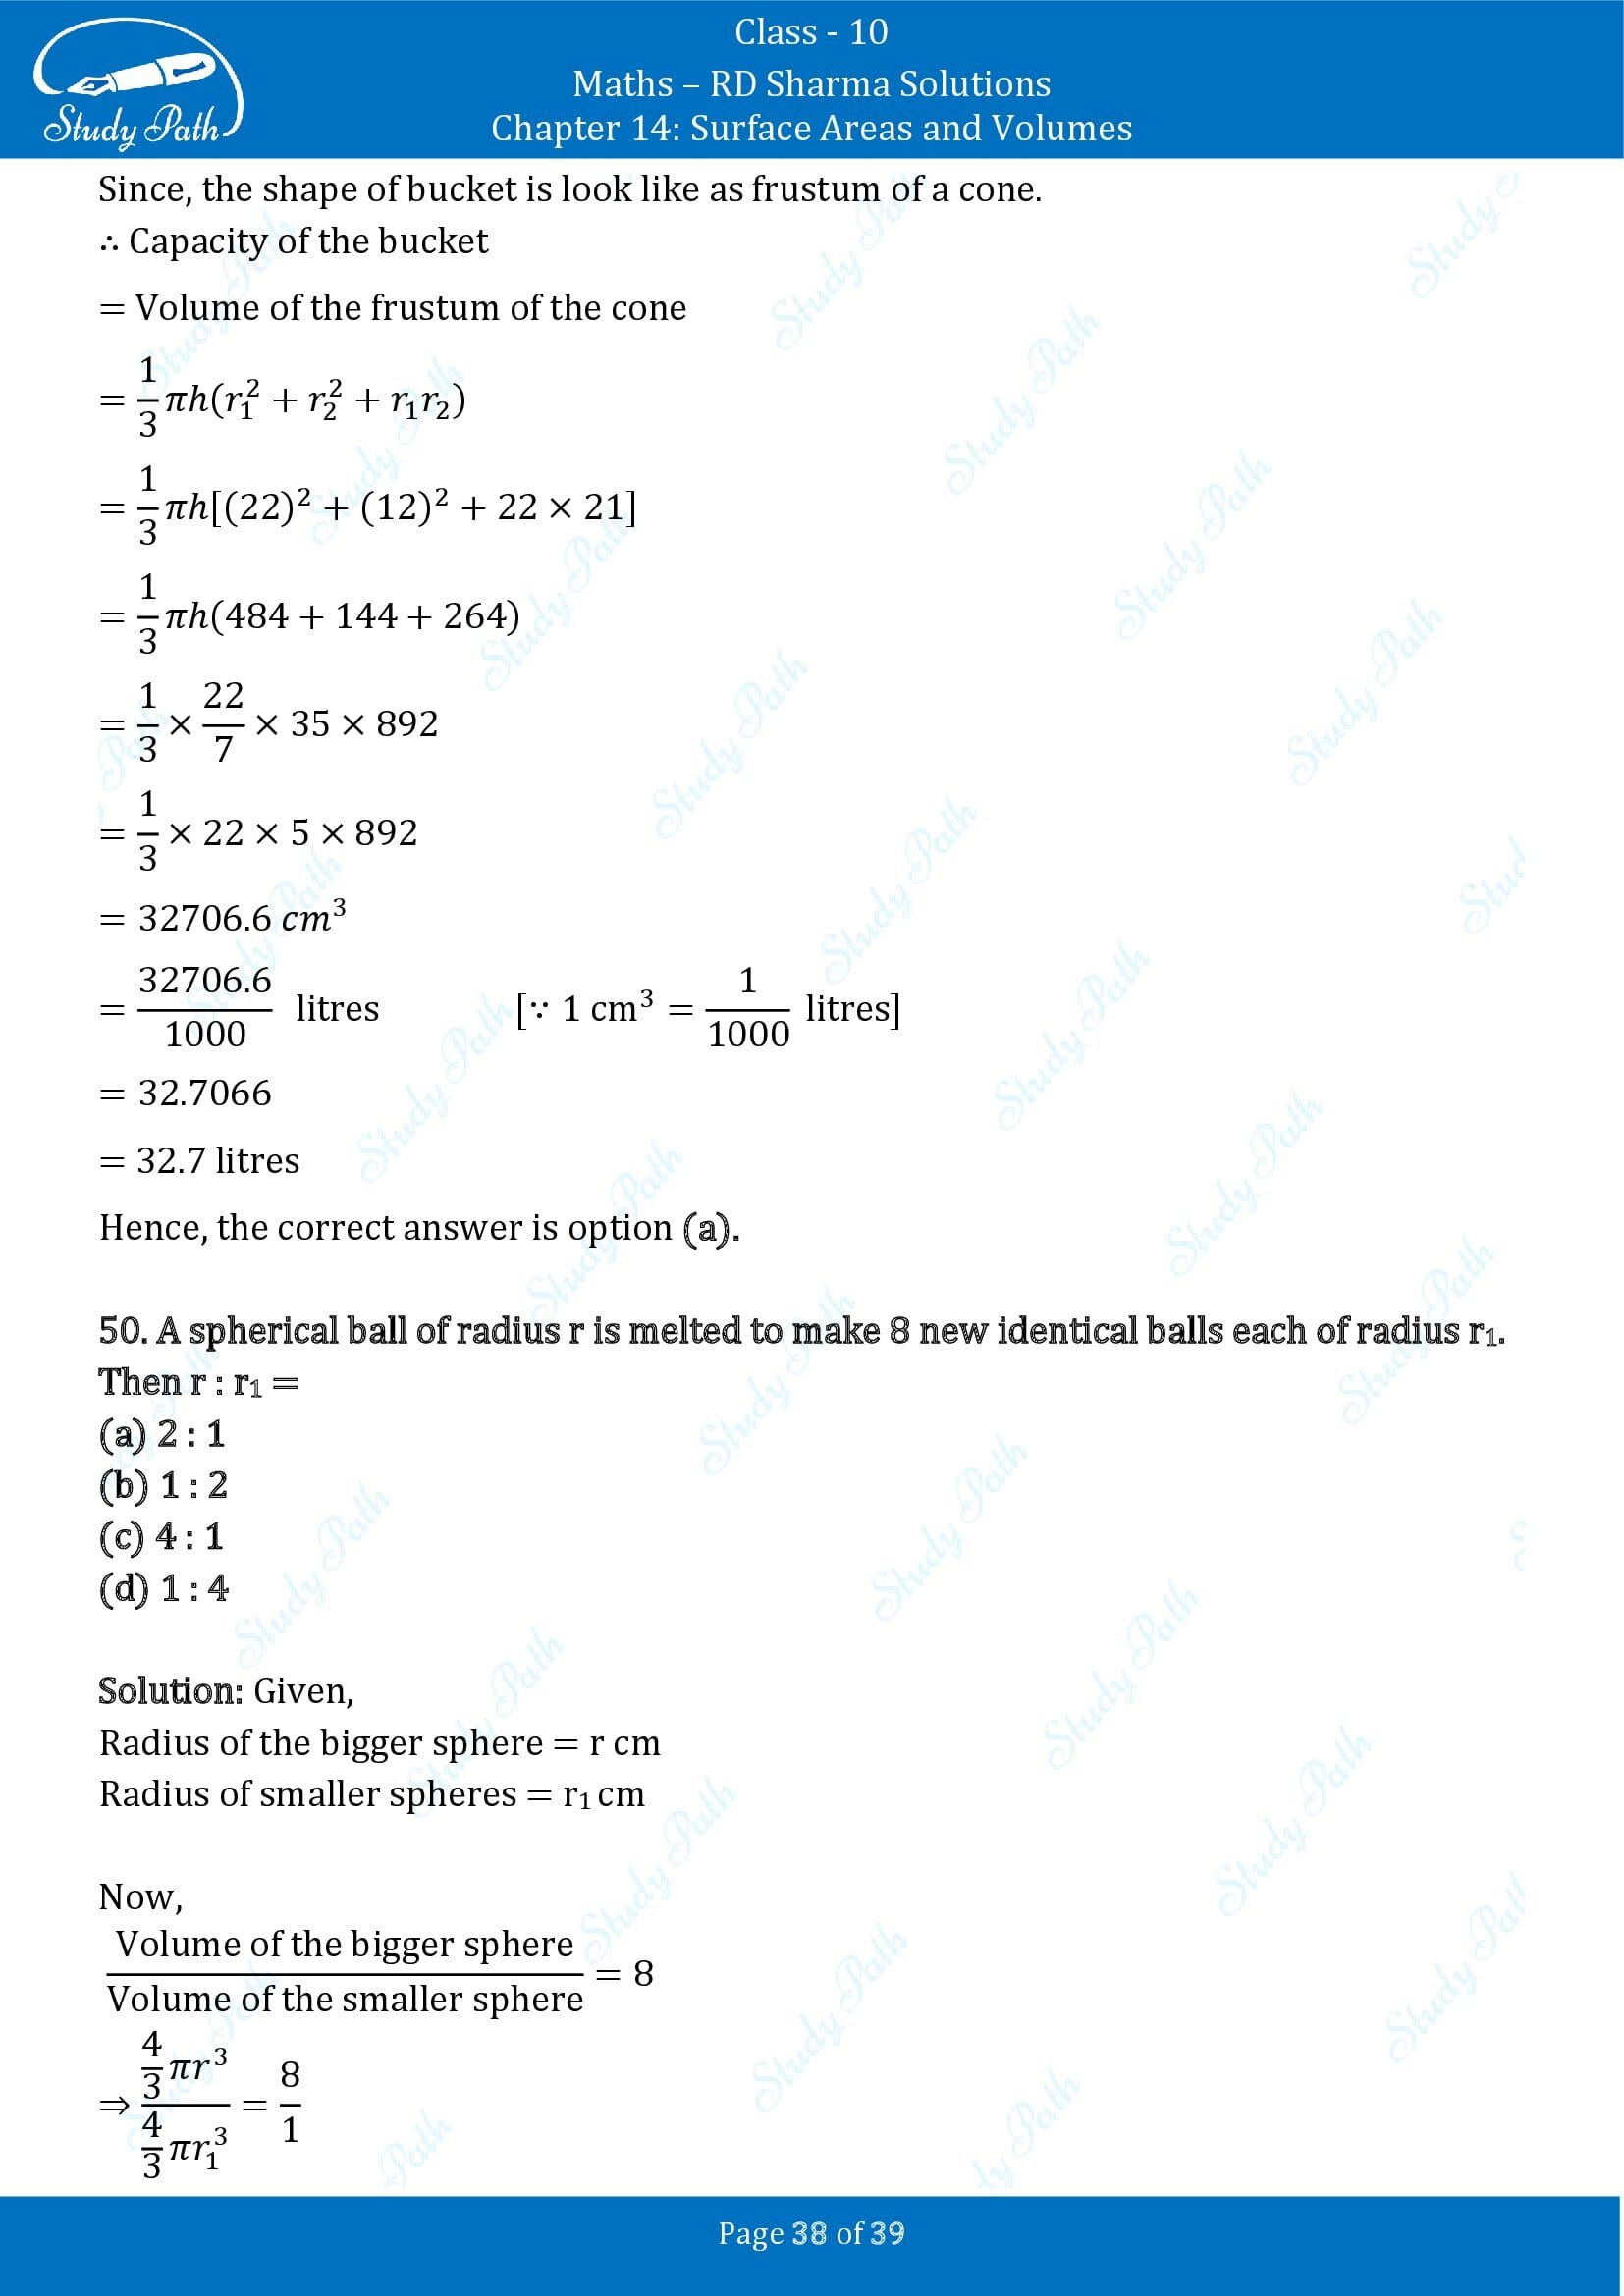 RD Sharma Solutions Class 10 Chapter 14 Surface Areas and Volumes Multiple Choice Question MCQs 00038